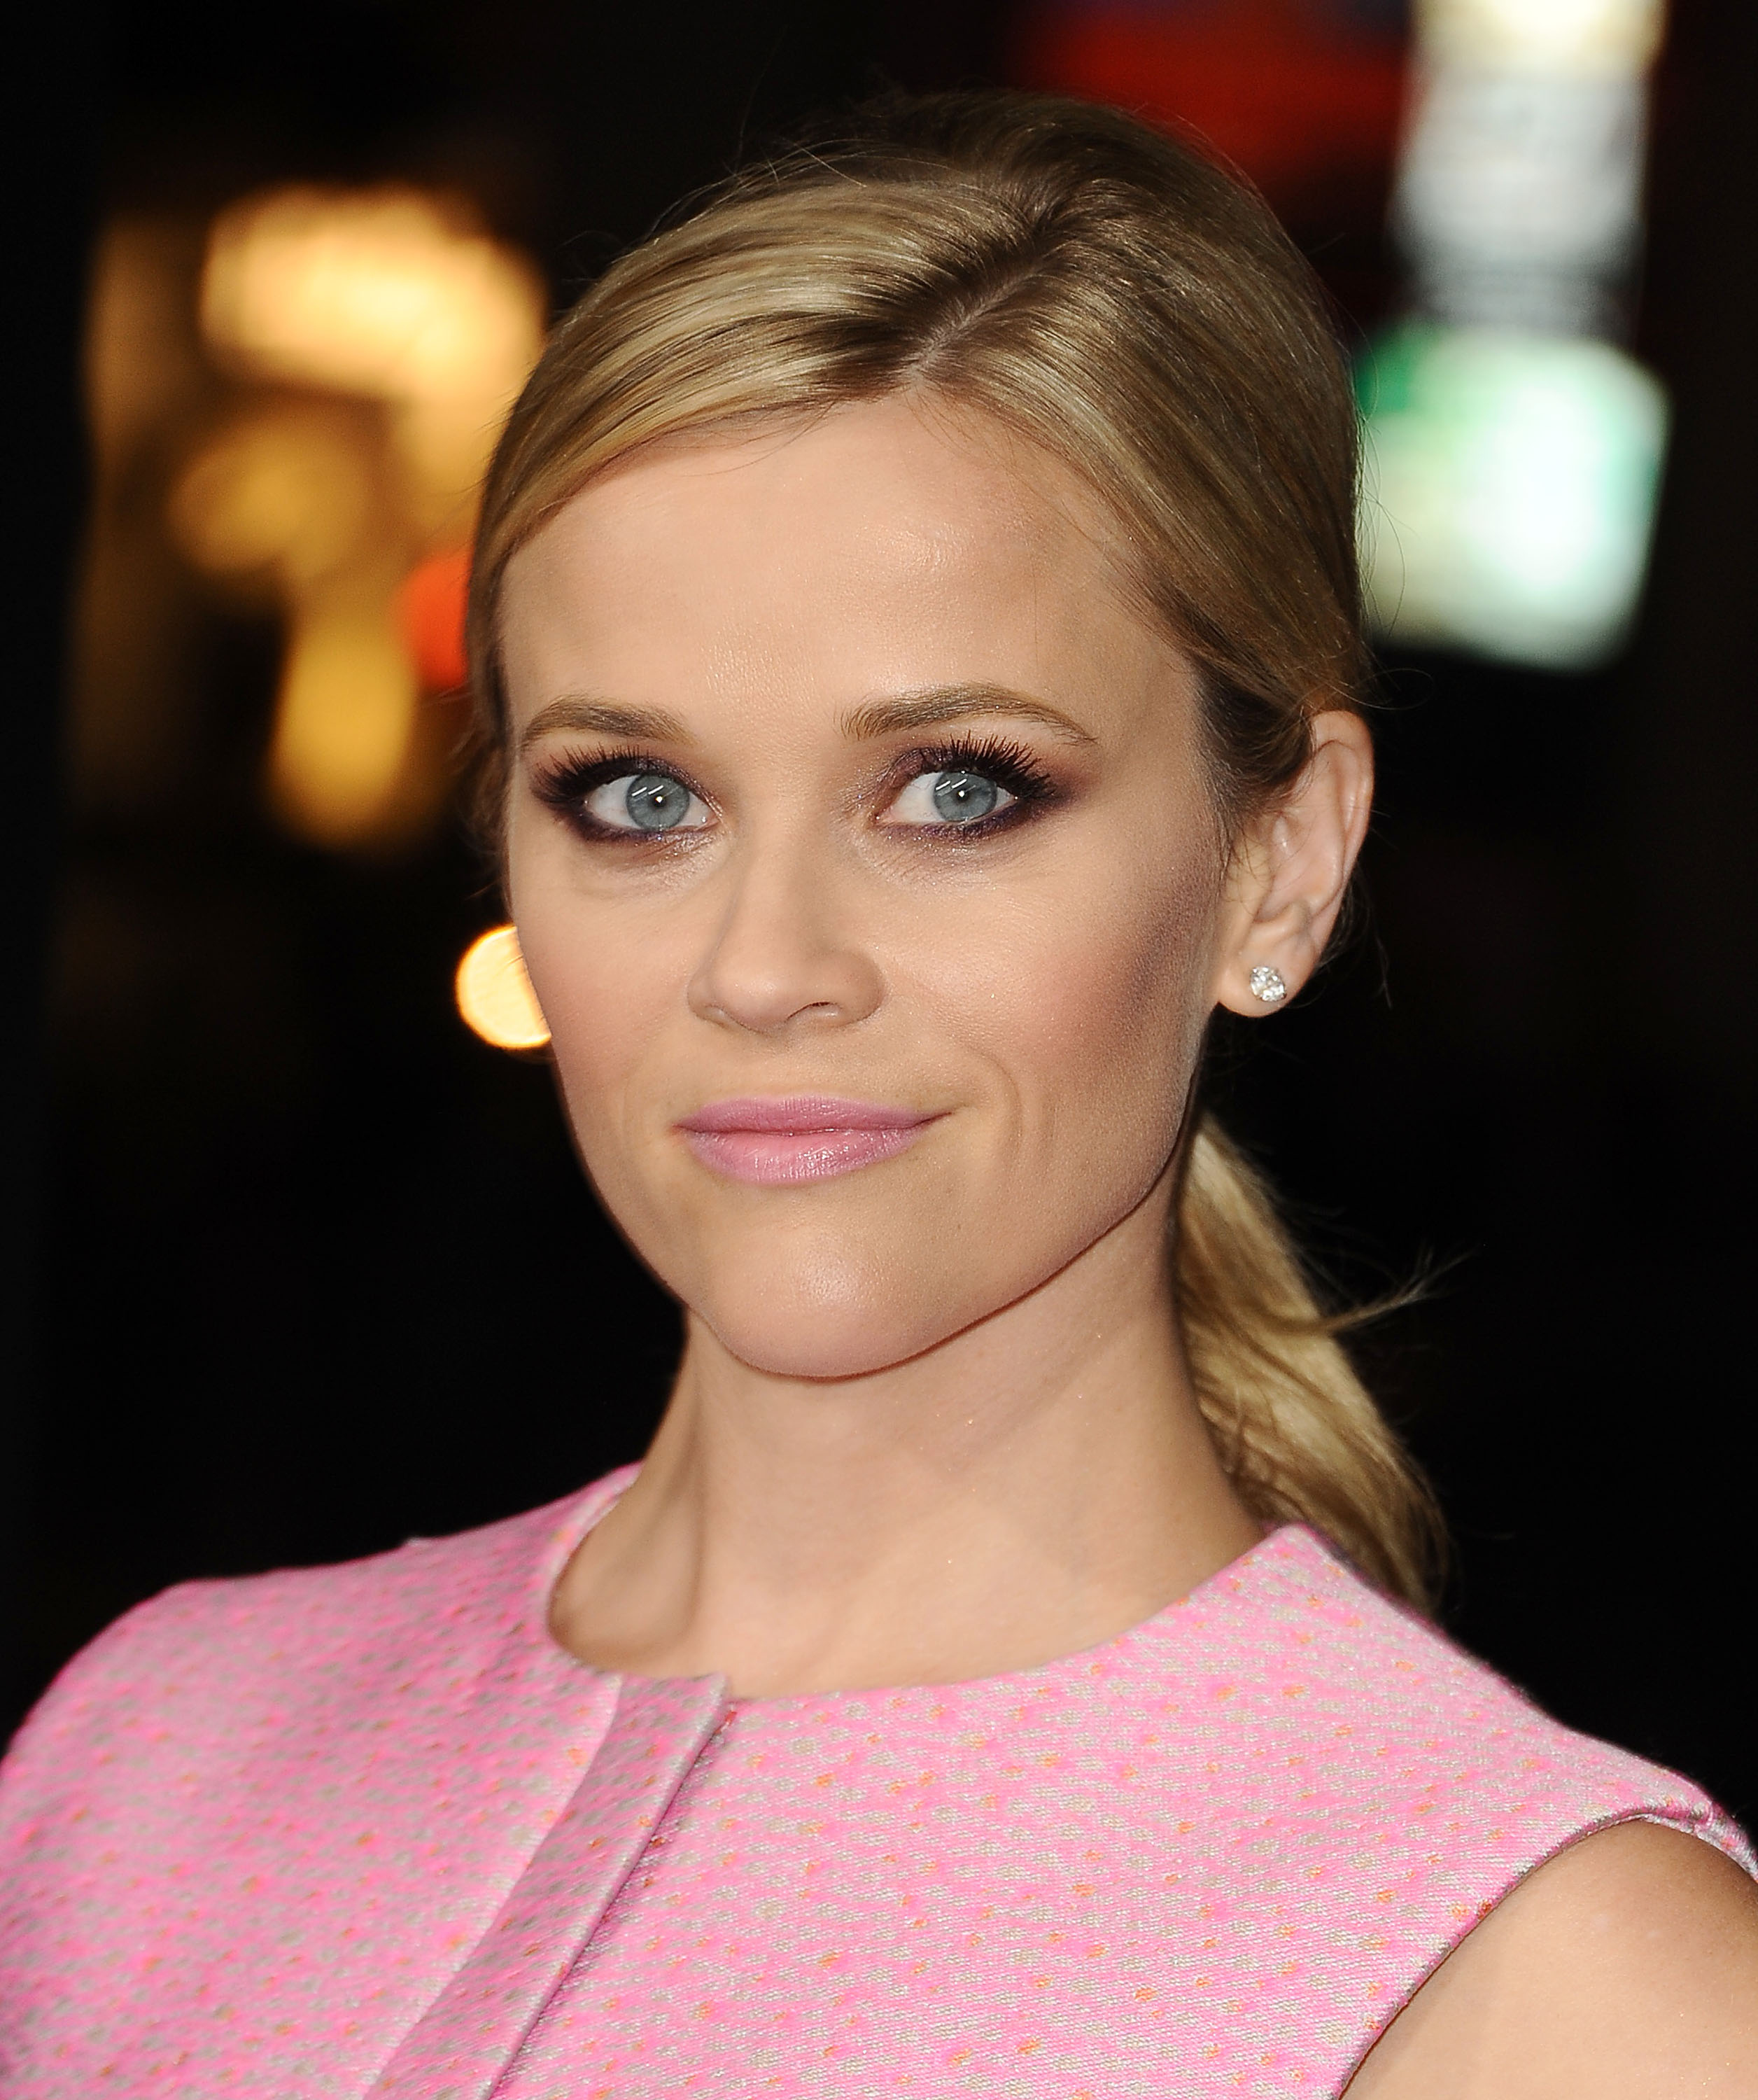 Reese Witherspoon attends the premiere of "Inherent Vice" on Dec. 10, 2014 in Hollywood, California.